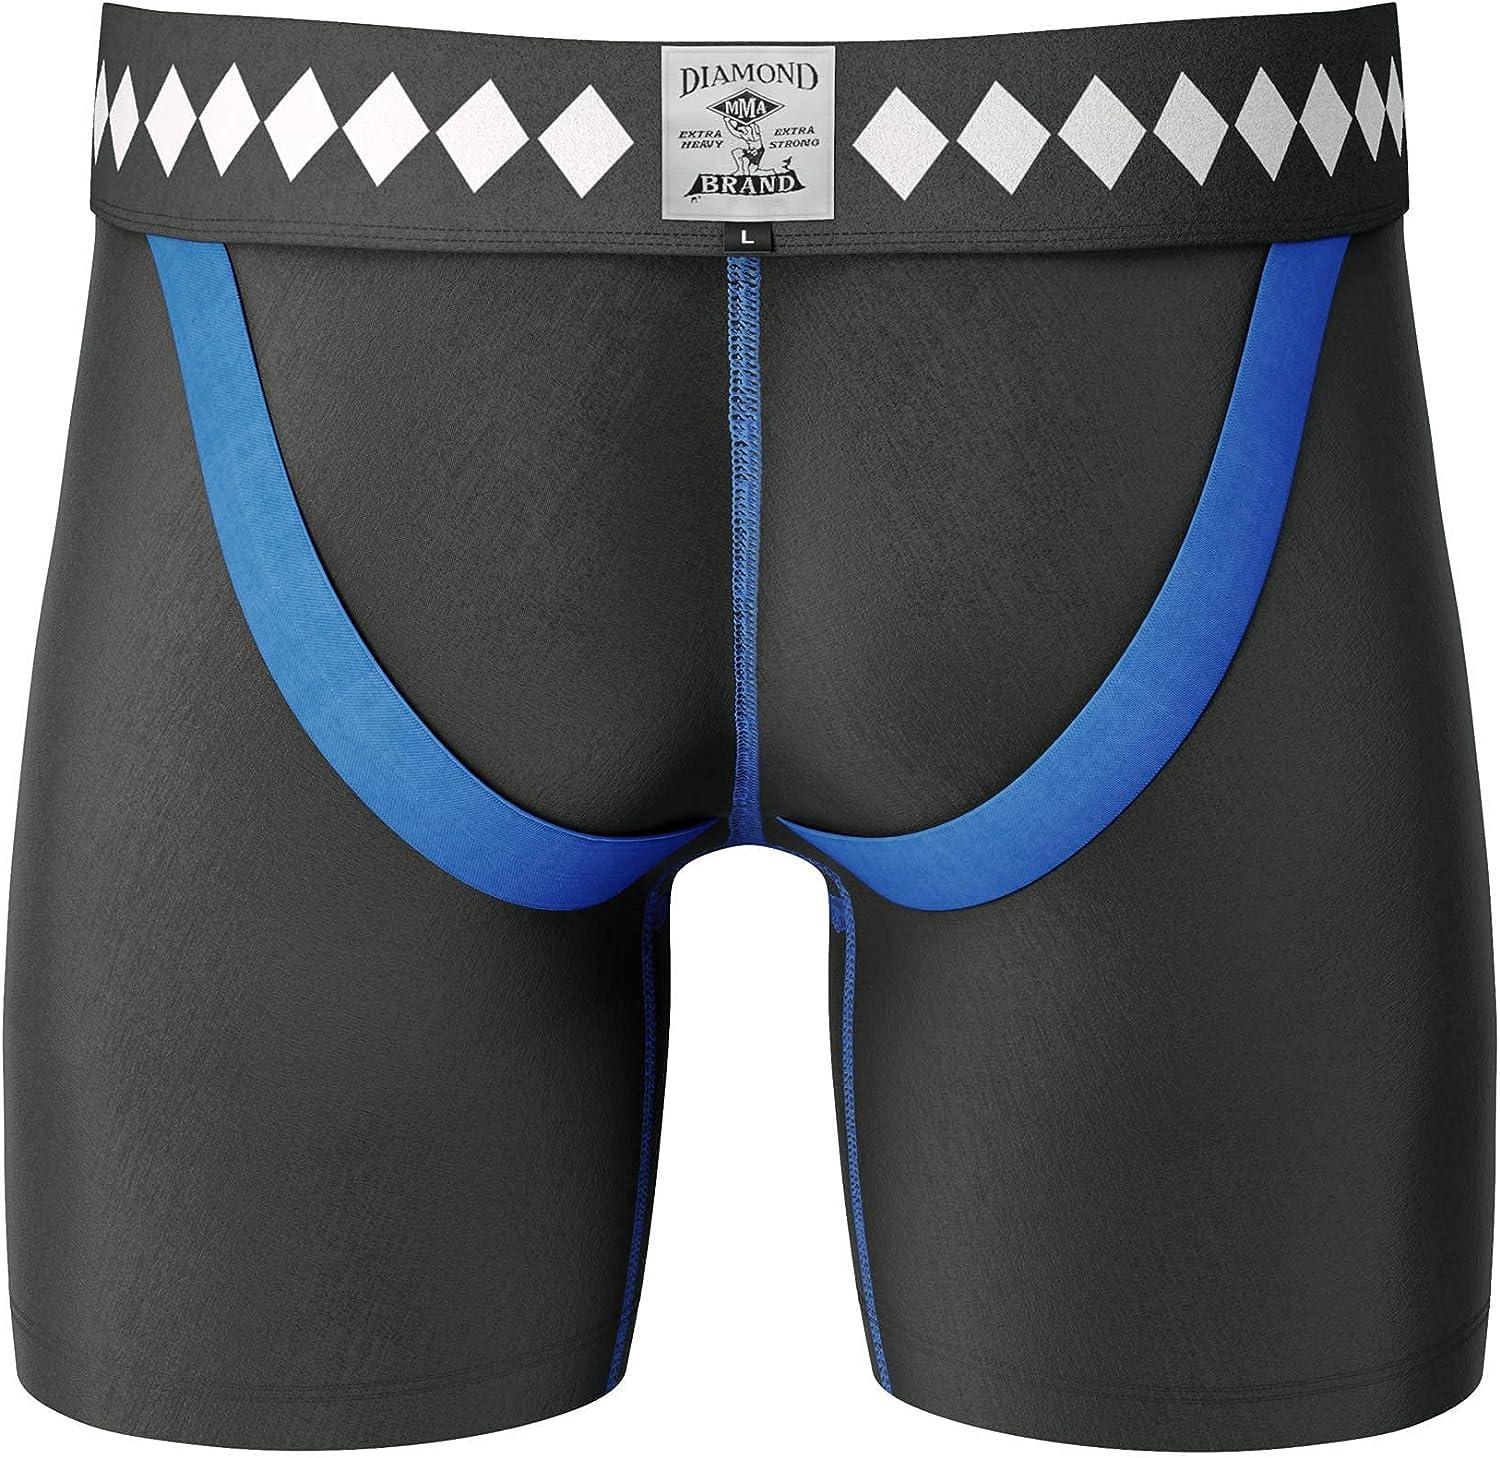 Diamond MMA Compression Shorts with Built-in Jock Strap Supporter